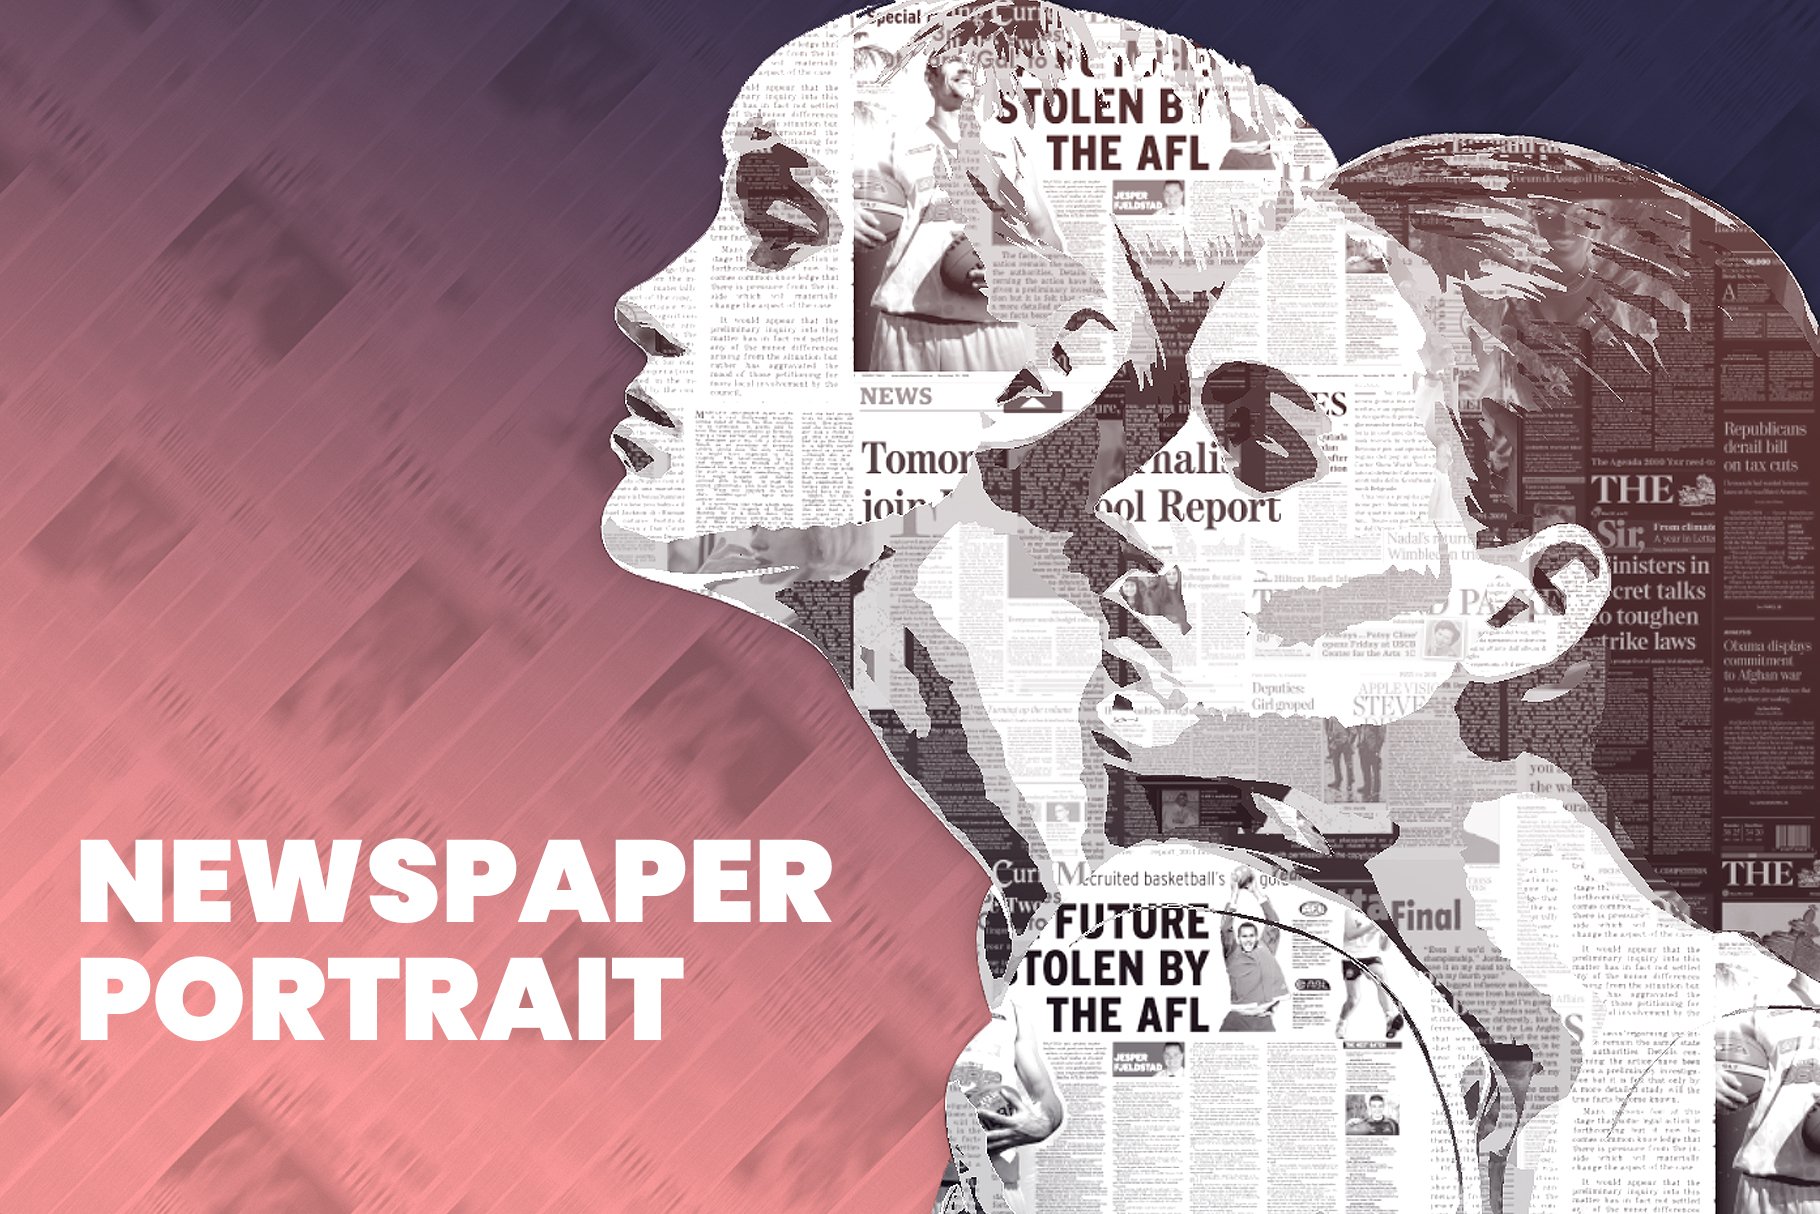 Newspaper Portrait PS Actioncover image.